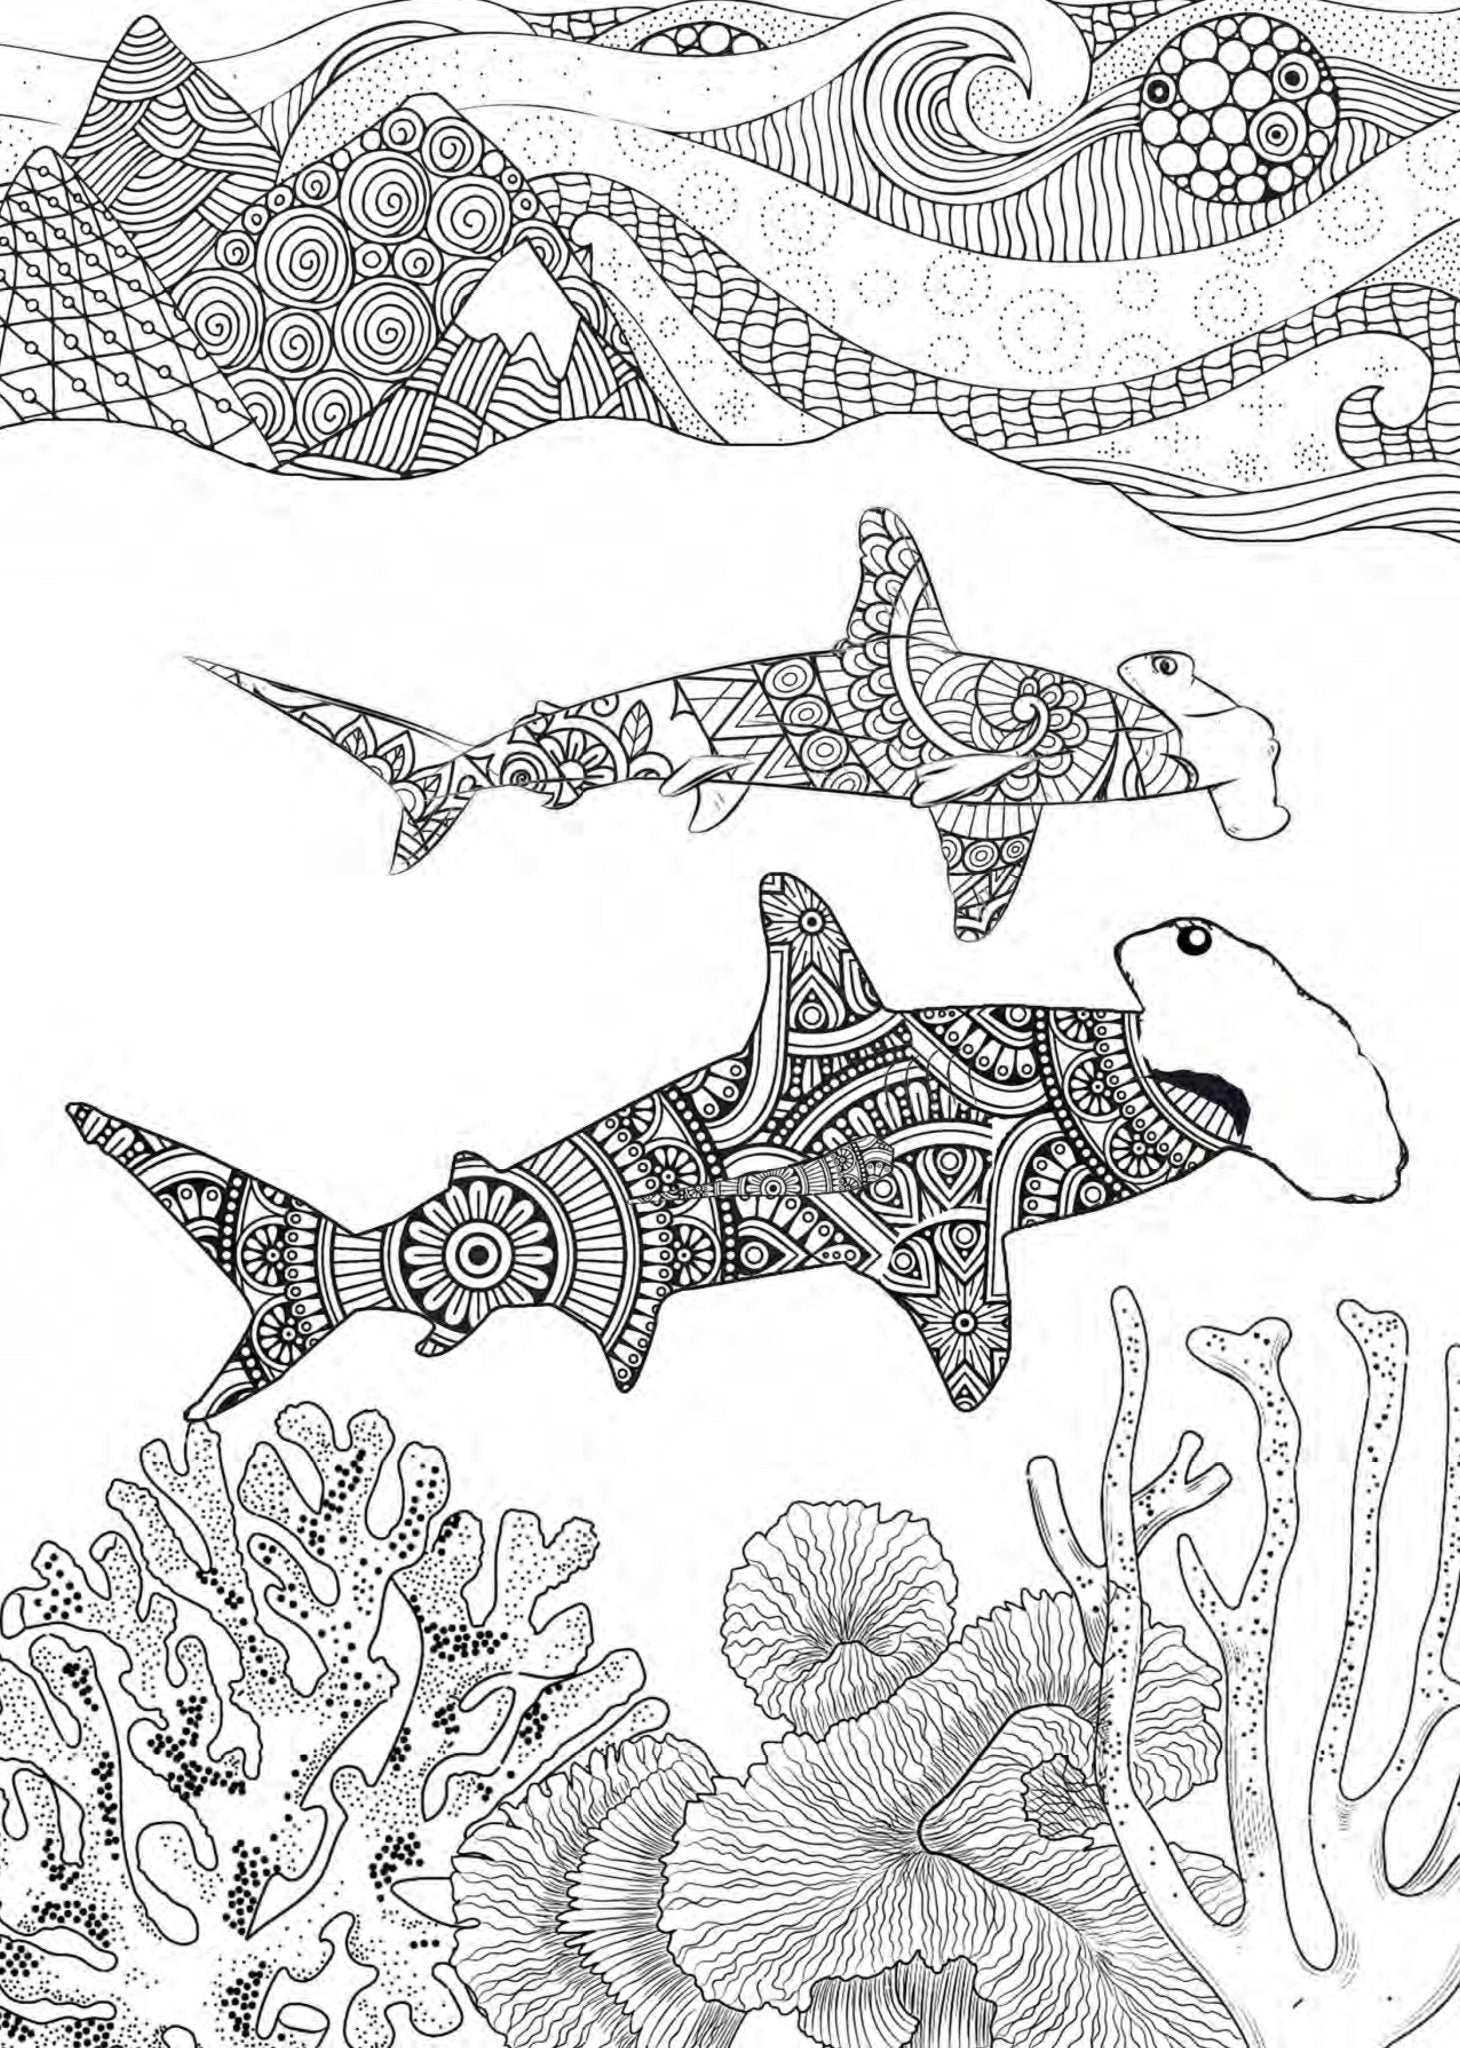 Wild Ocean Coloring Book for Adults (Printbook) - Monsoon Publishing USA